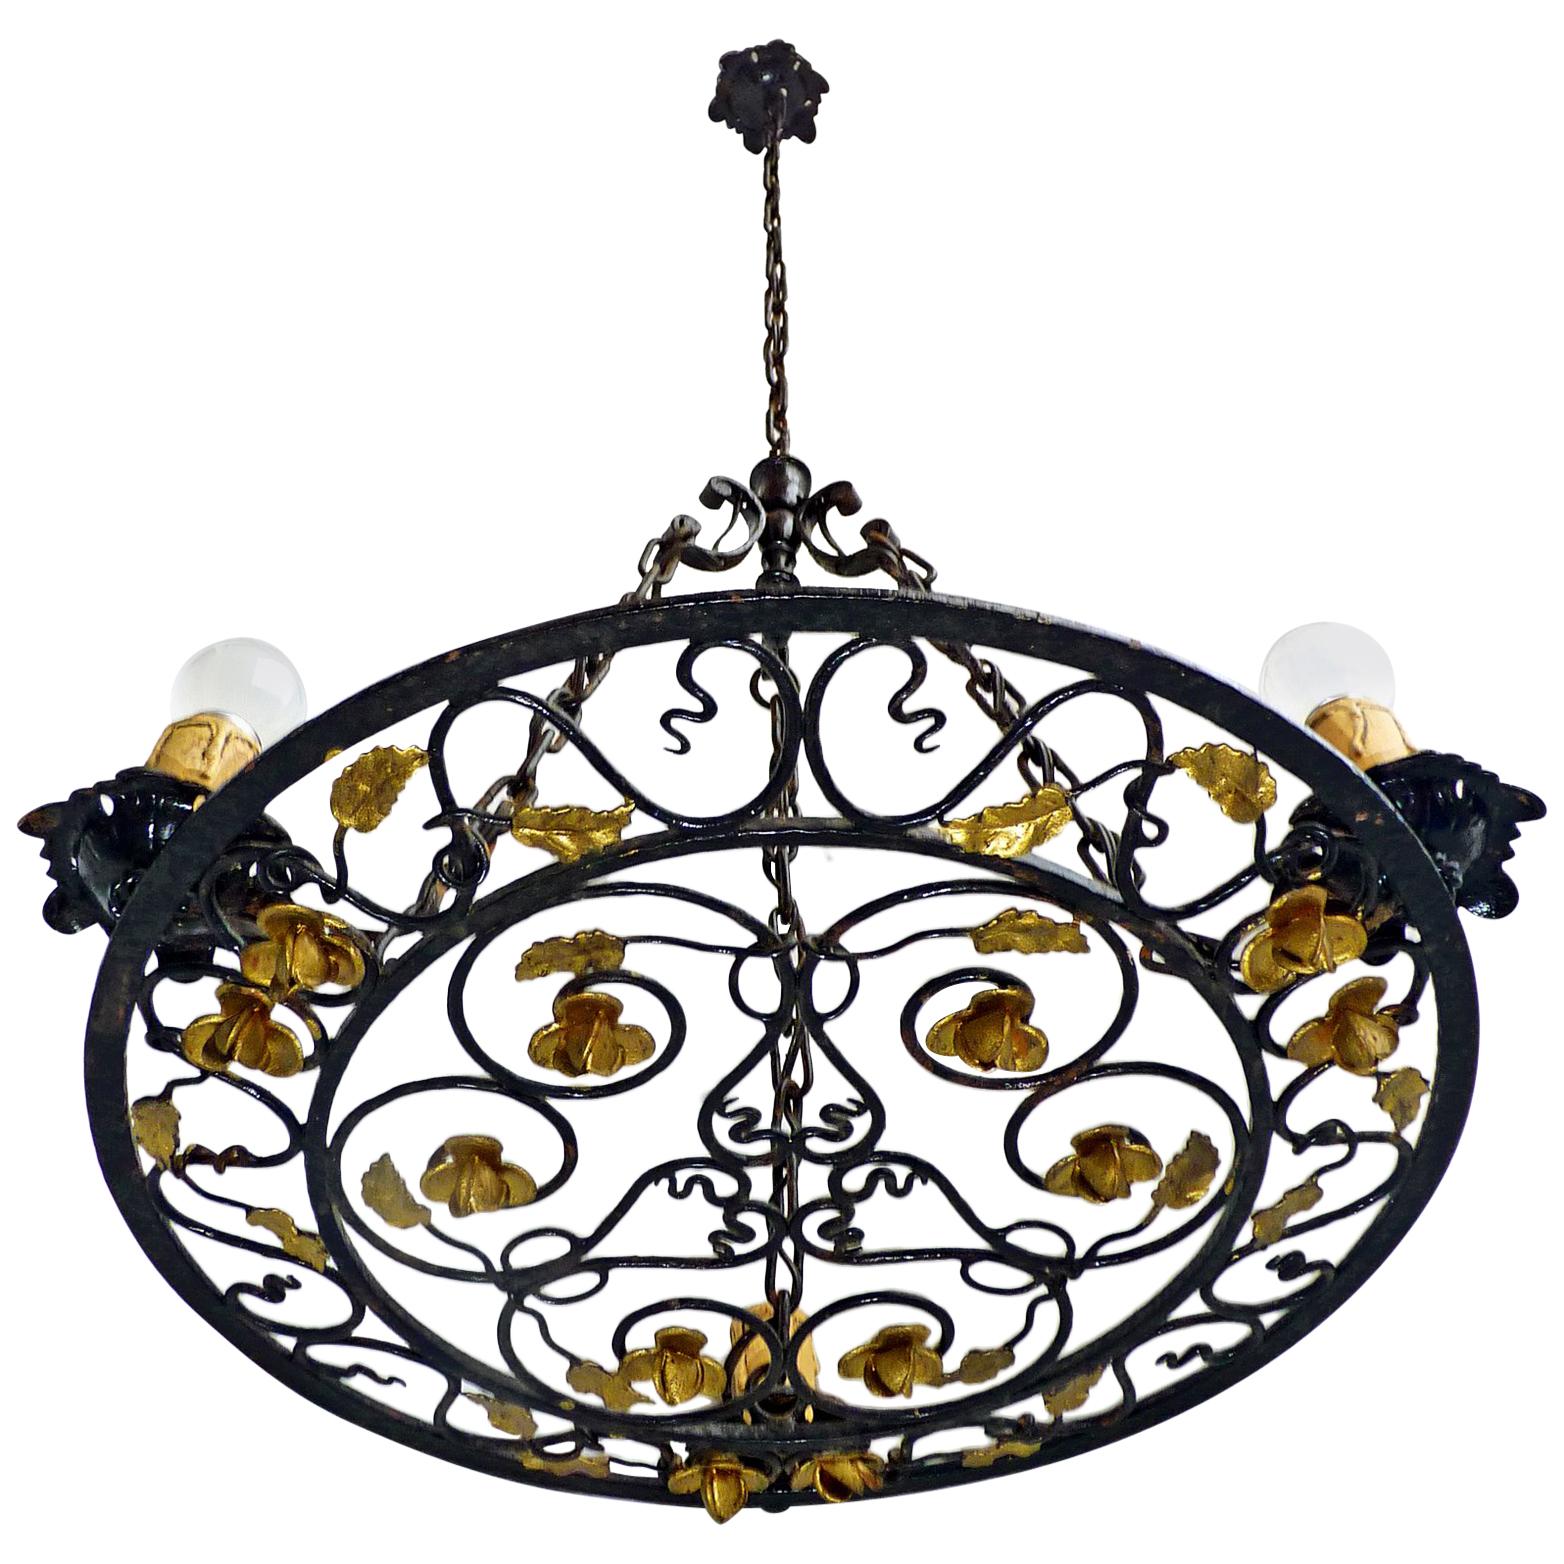 French Art Nouveau, Art Deco Round Gilt Hand Forged Scrolled Iron Chandelier 1